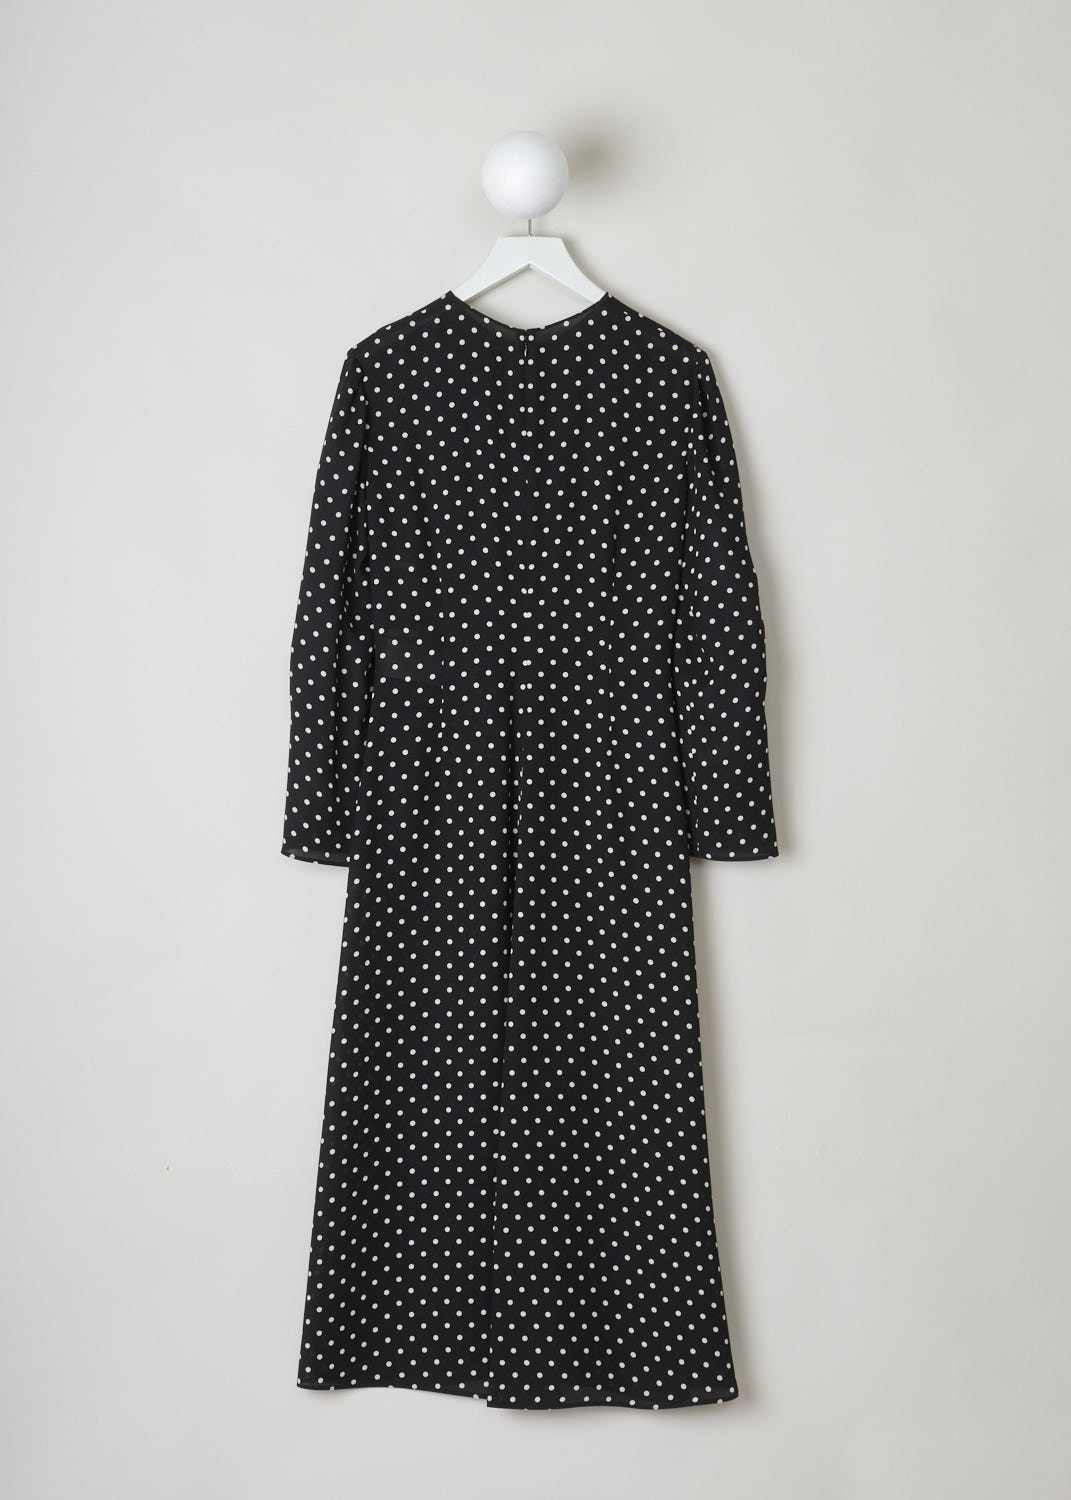 VALENTINO, SILK POLKA DOT MIDI DRESS, UB3VASO65LN_0NA, Black, Print, Back, Beautiful silk dress in a classic black and white polka dot print. This dress has a high, rounded neckline and long sleeves. A concealed zipper can be found on the back. What makes this dress stand out, is the elegant knotted detail across the front. 
